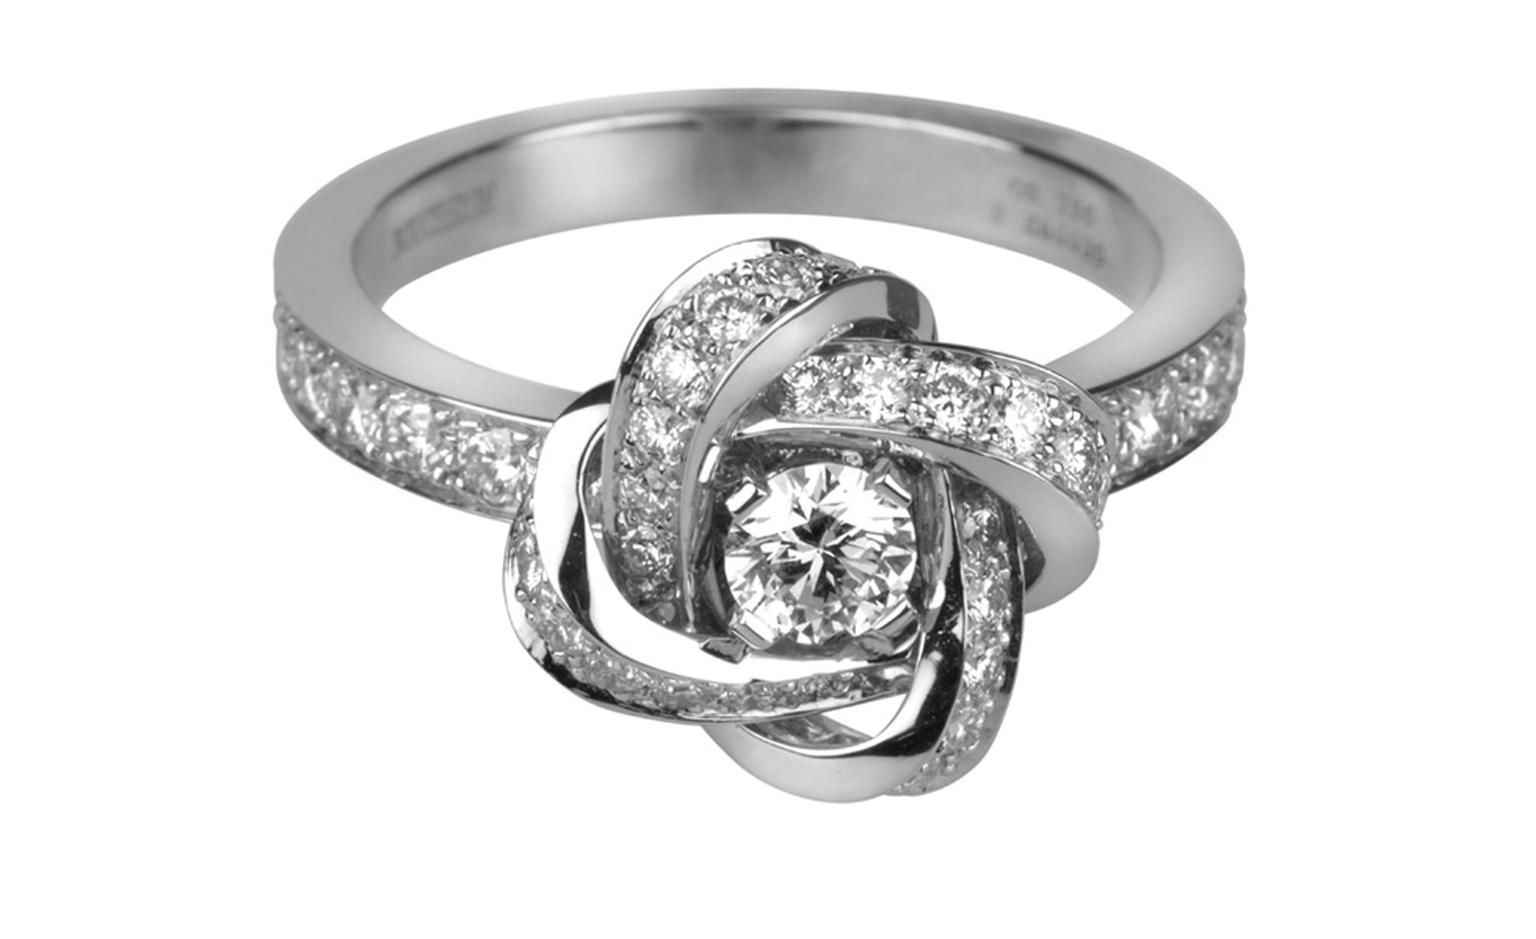 BOUCHERON, Ava Pivoine Ring in white gold paved with diamonds. Price from £2,900